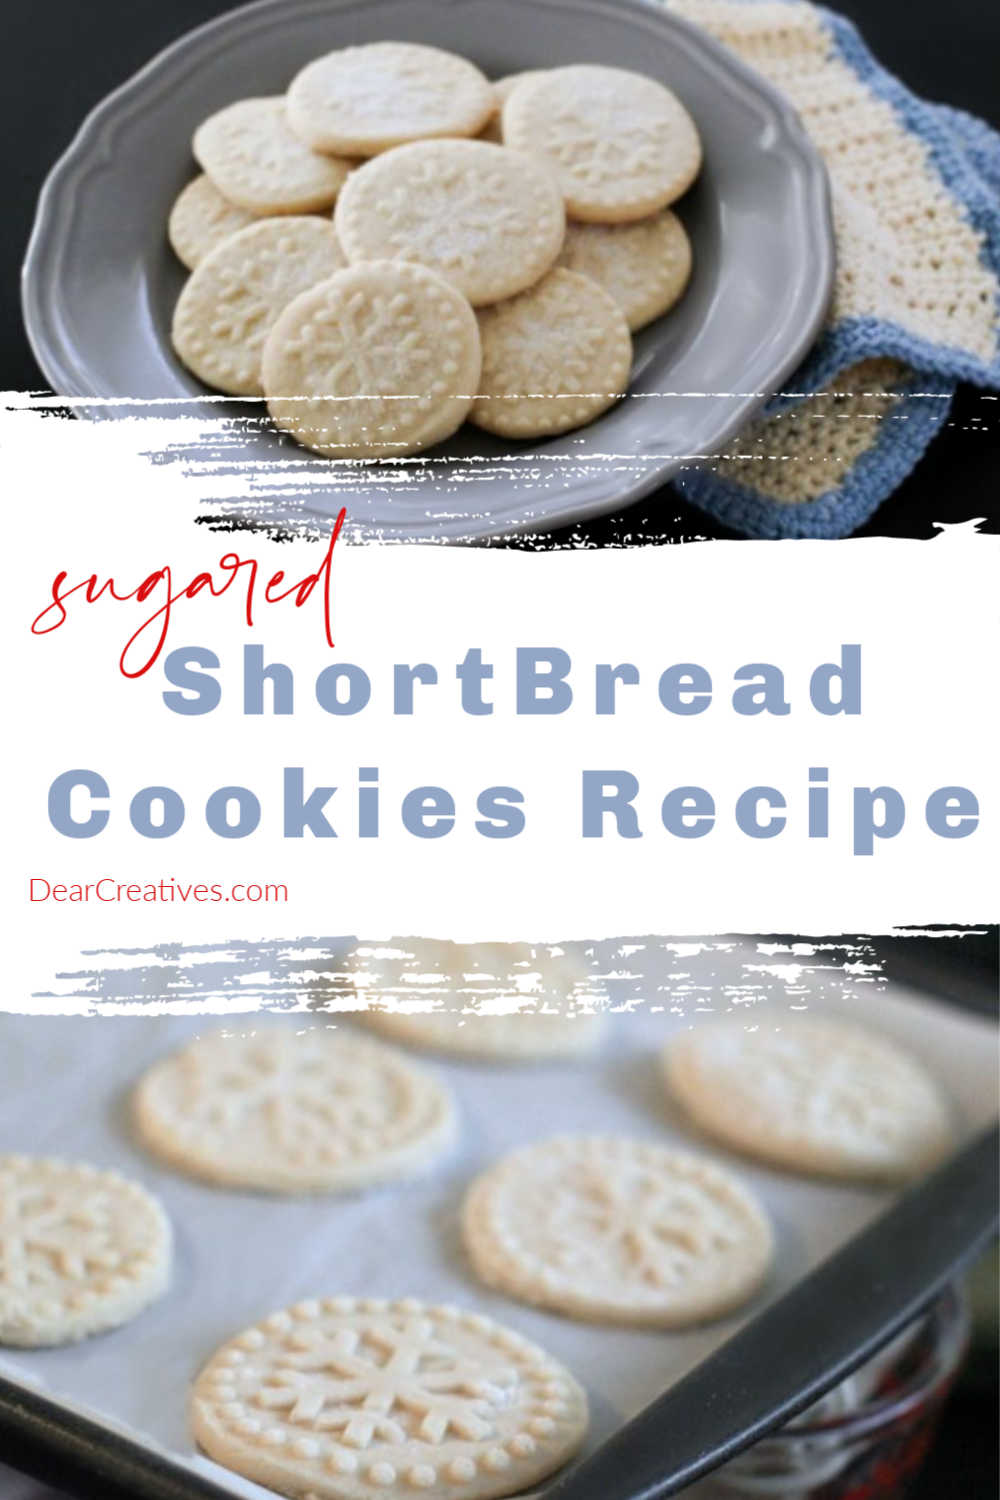 Sugared Shortbread Cookies - You will want to try this shortbread cookies recipe made with or without the sugar sprinkled on top, they are delicious! It's become a family favorite we make over and over for Christmas cookies, holidays and anytime we want shortbread cookies. Vary designs by using different cookie stamps and presses. Find this cookies recipe and more at DearCreatives.com